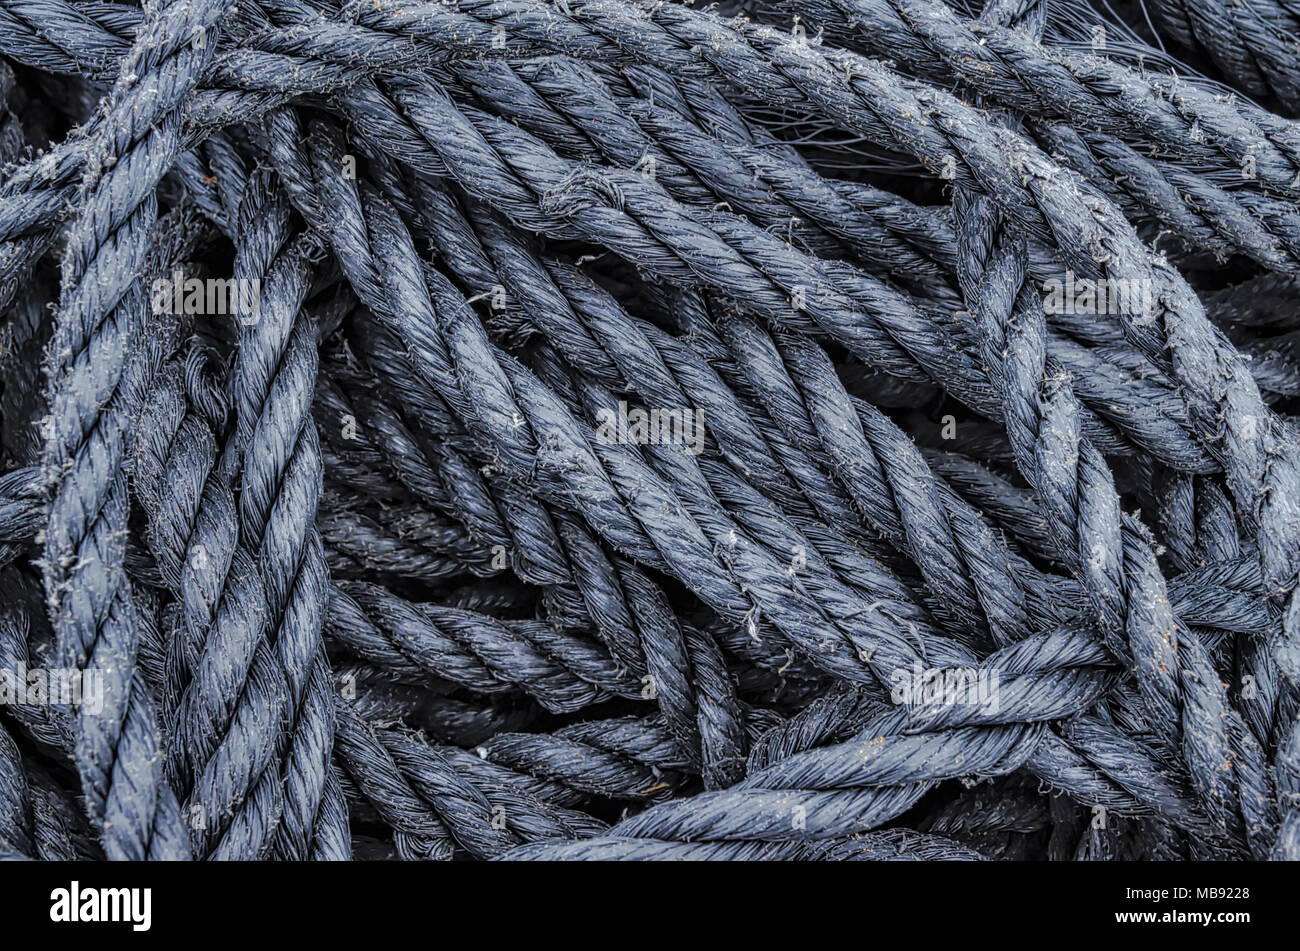 Abstract background of black fisherman's rope pattern. Stock Photo